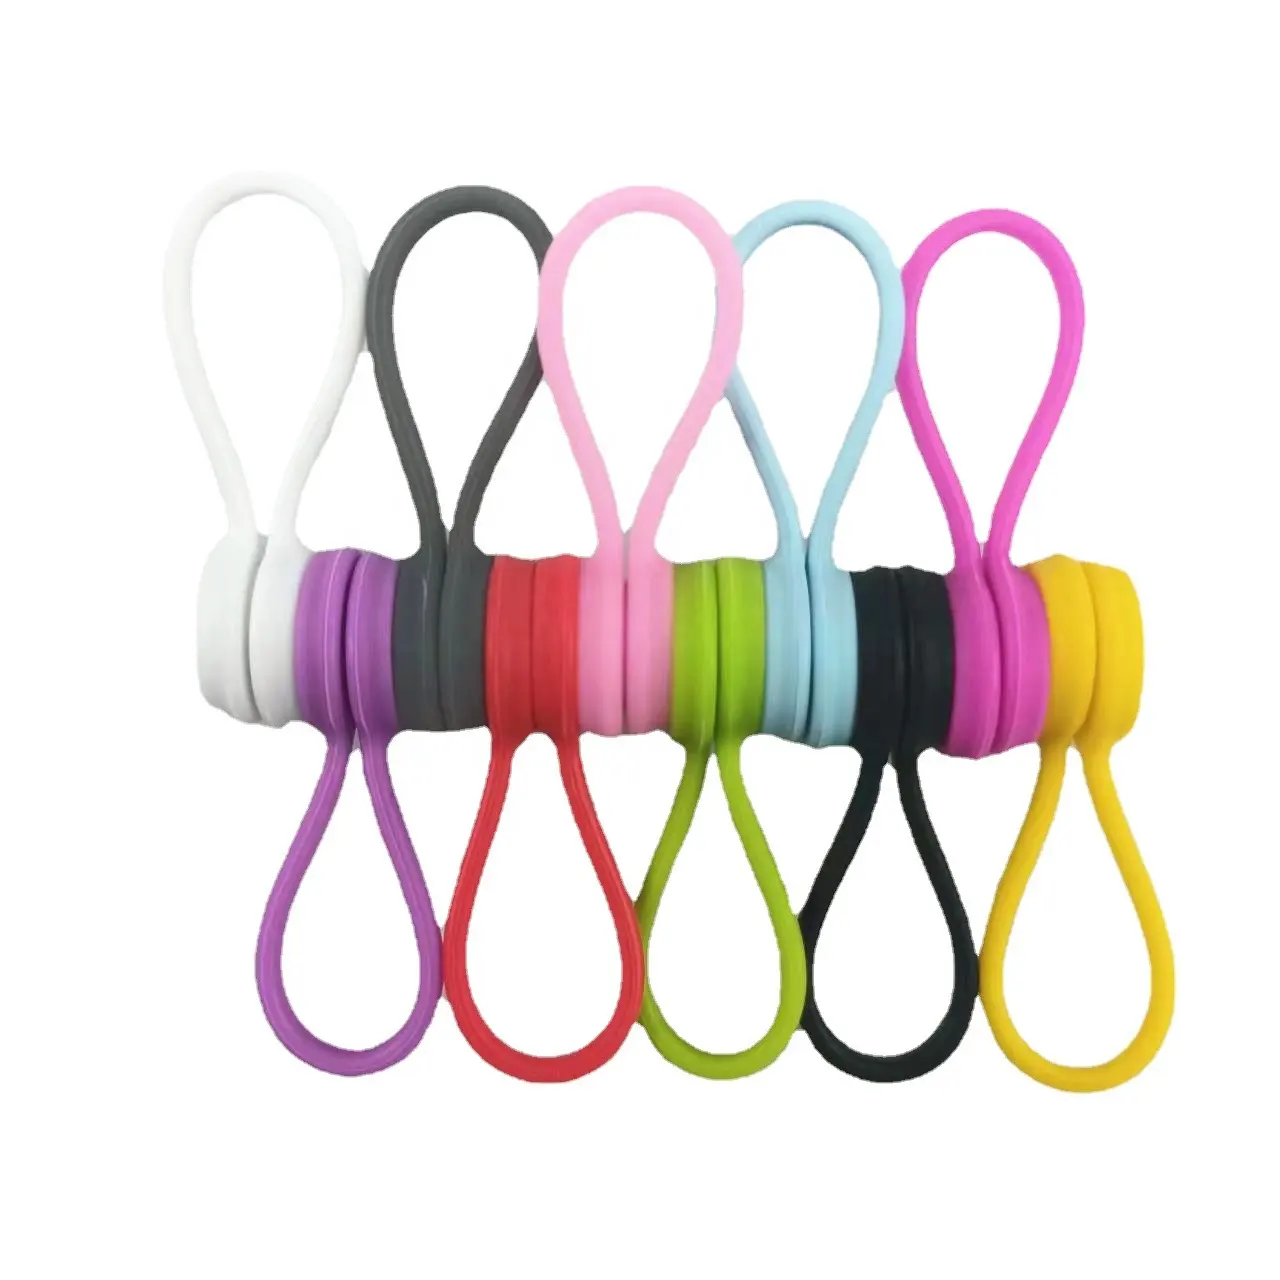 Multi-use Magnet Storage Straps To Organize Reusable Silicone Zip Ties Durable Cable Ties Bag Seal Clips Cable Straps